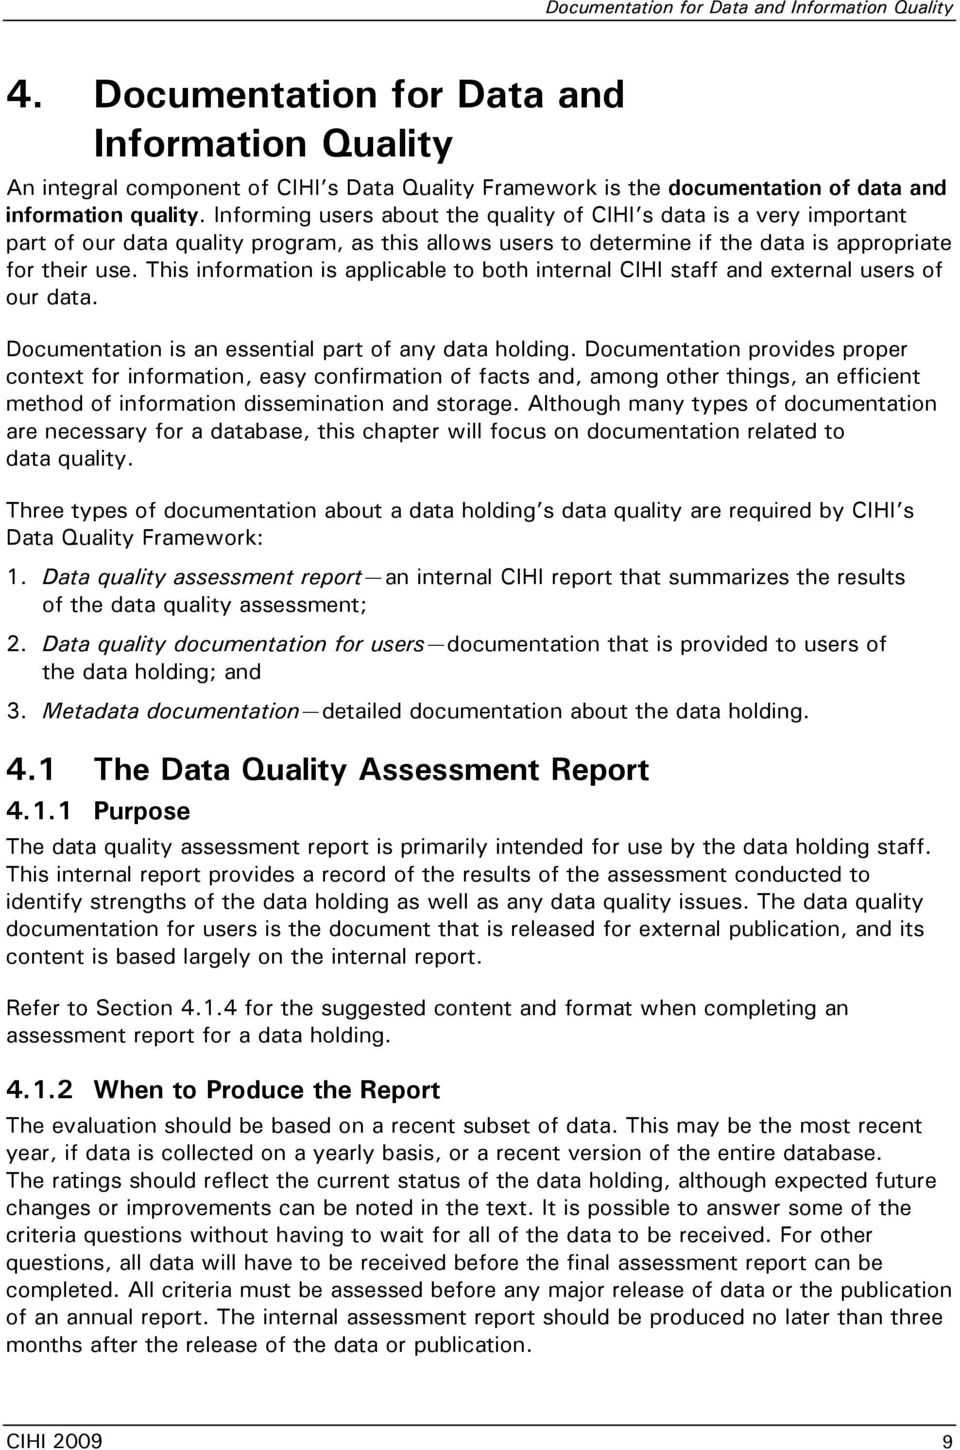 The Cihi Data Quality Framework - Pdf Free Download With Data Quality Assessment Report Template